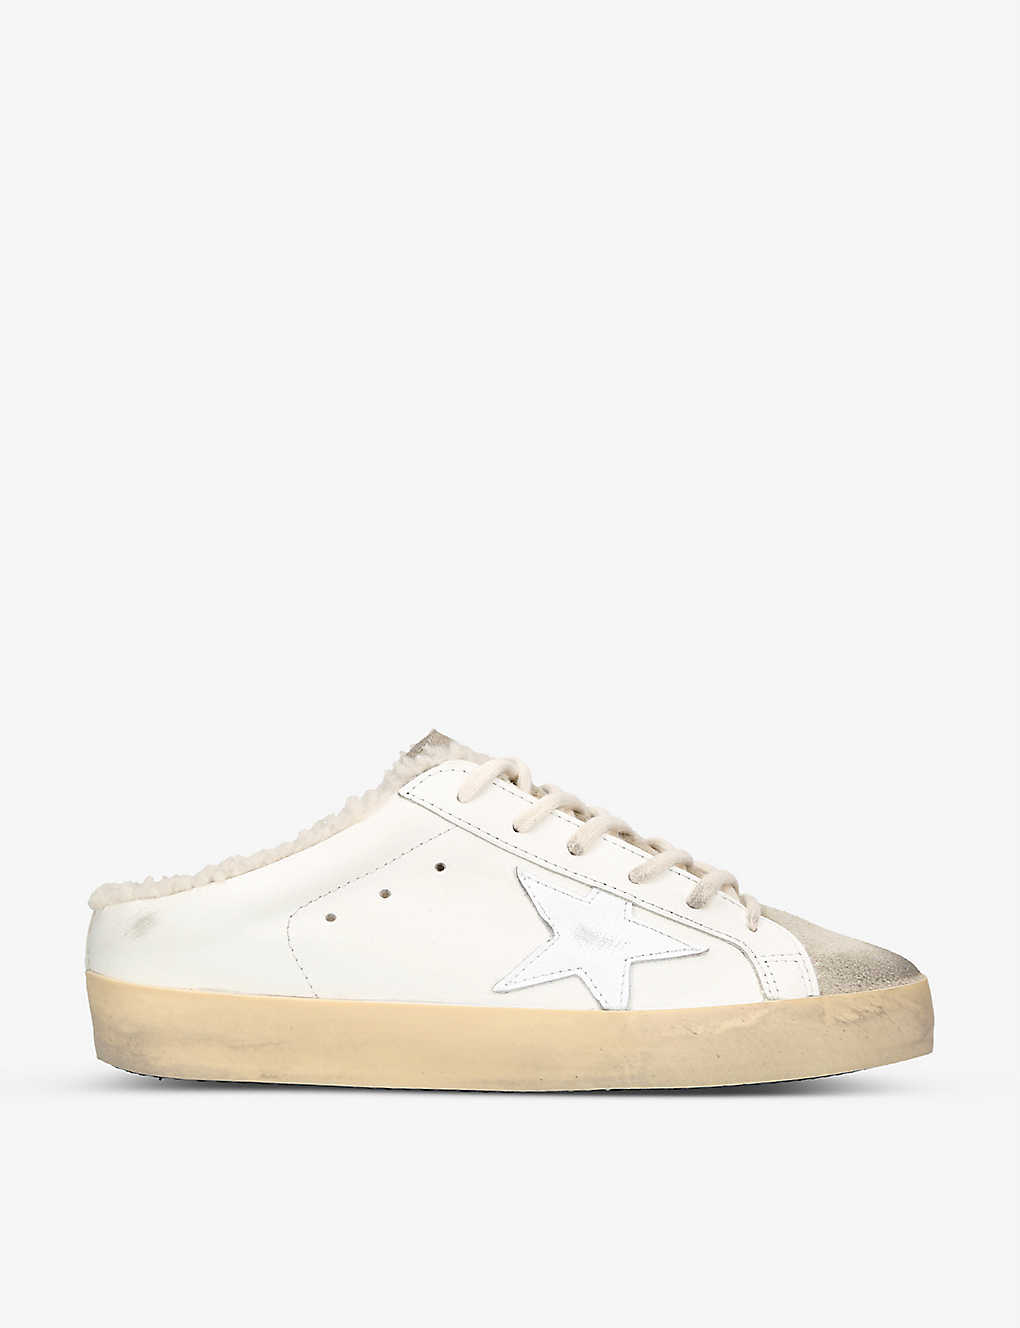 Shop Golden Goose Women's White/oth Superstar Sabot 81760 Leather And Shearling Trainers